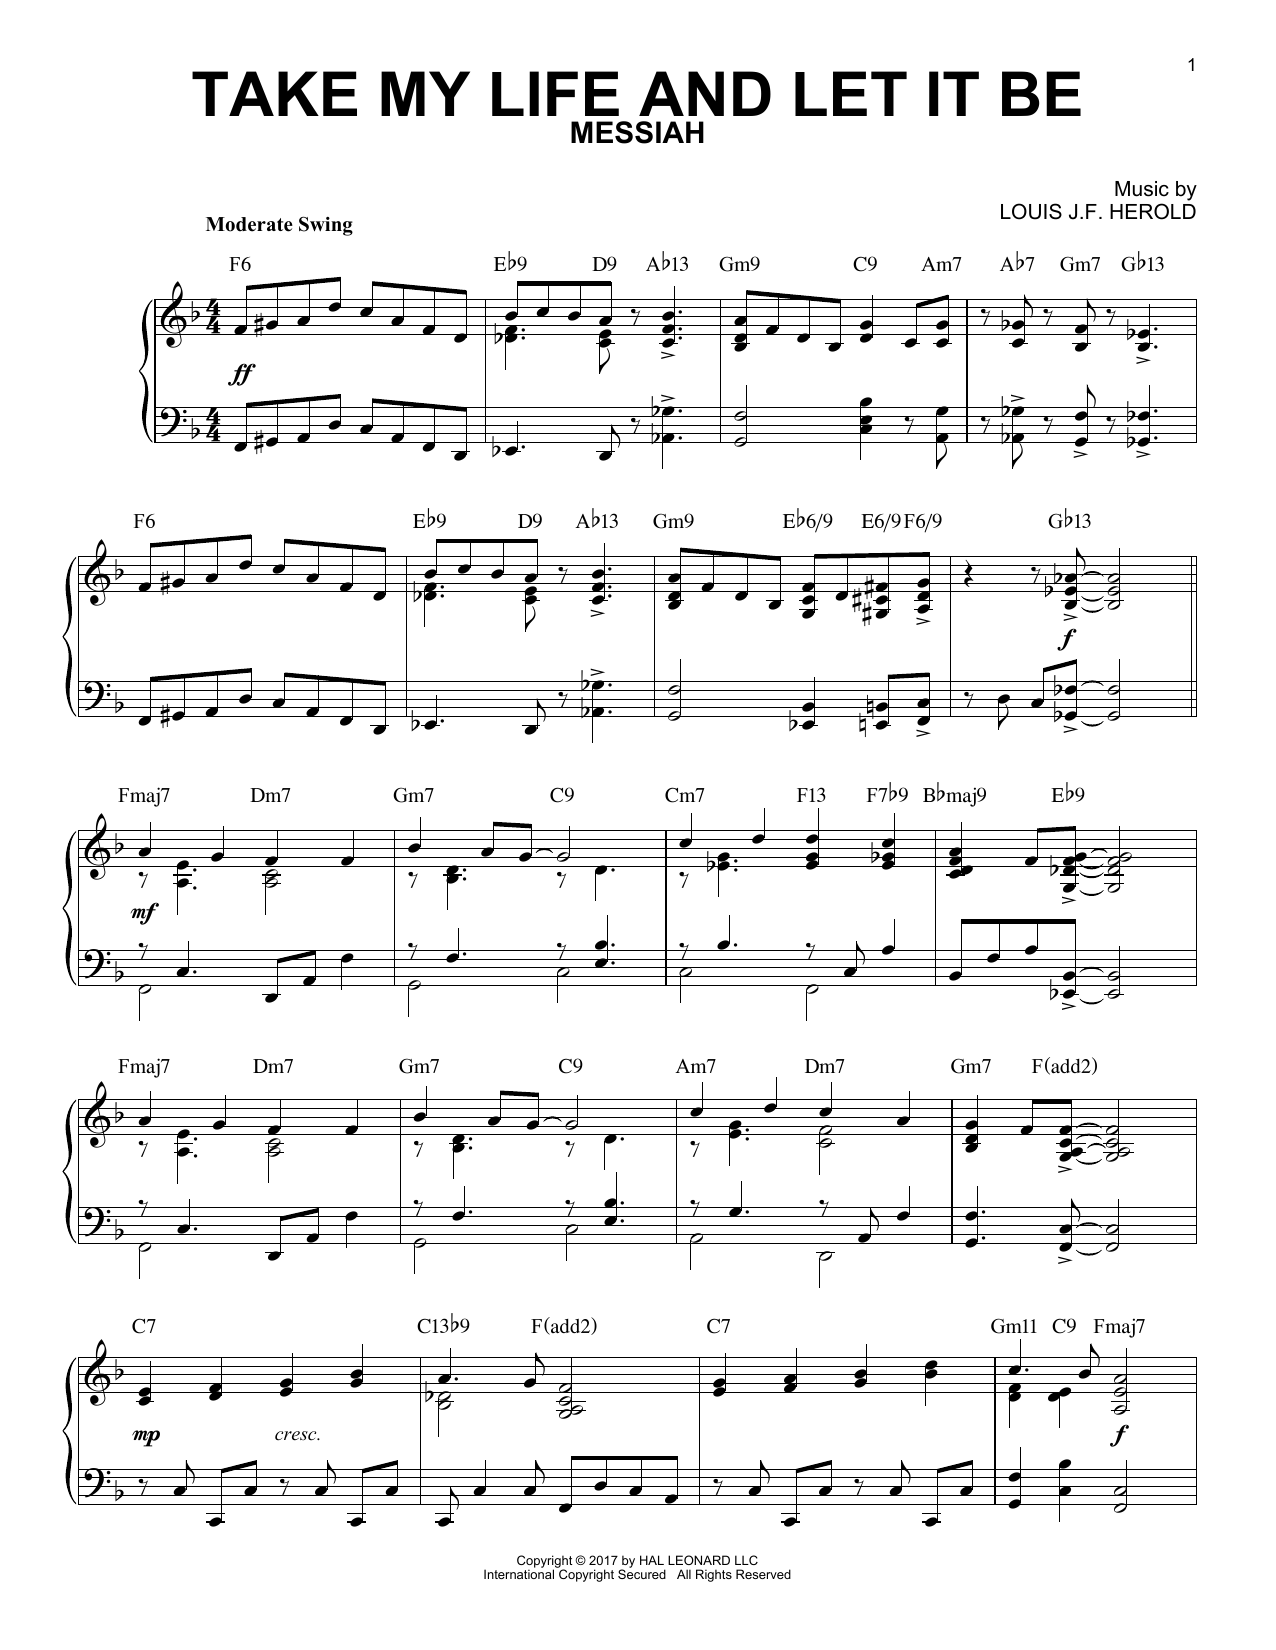 Take My Life And Let It Be [Jazz version] sheet music